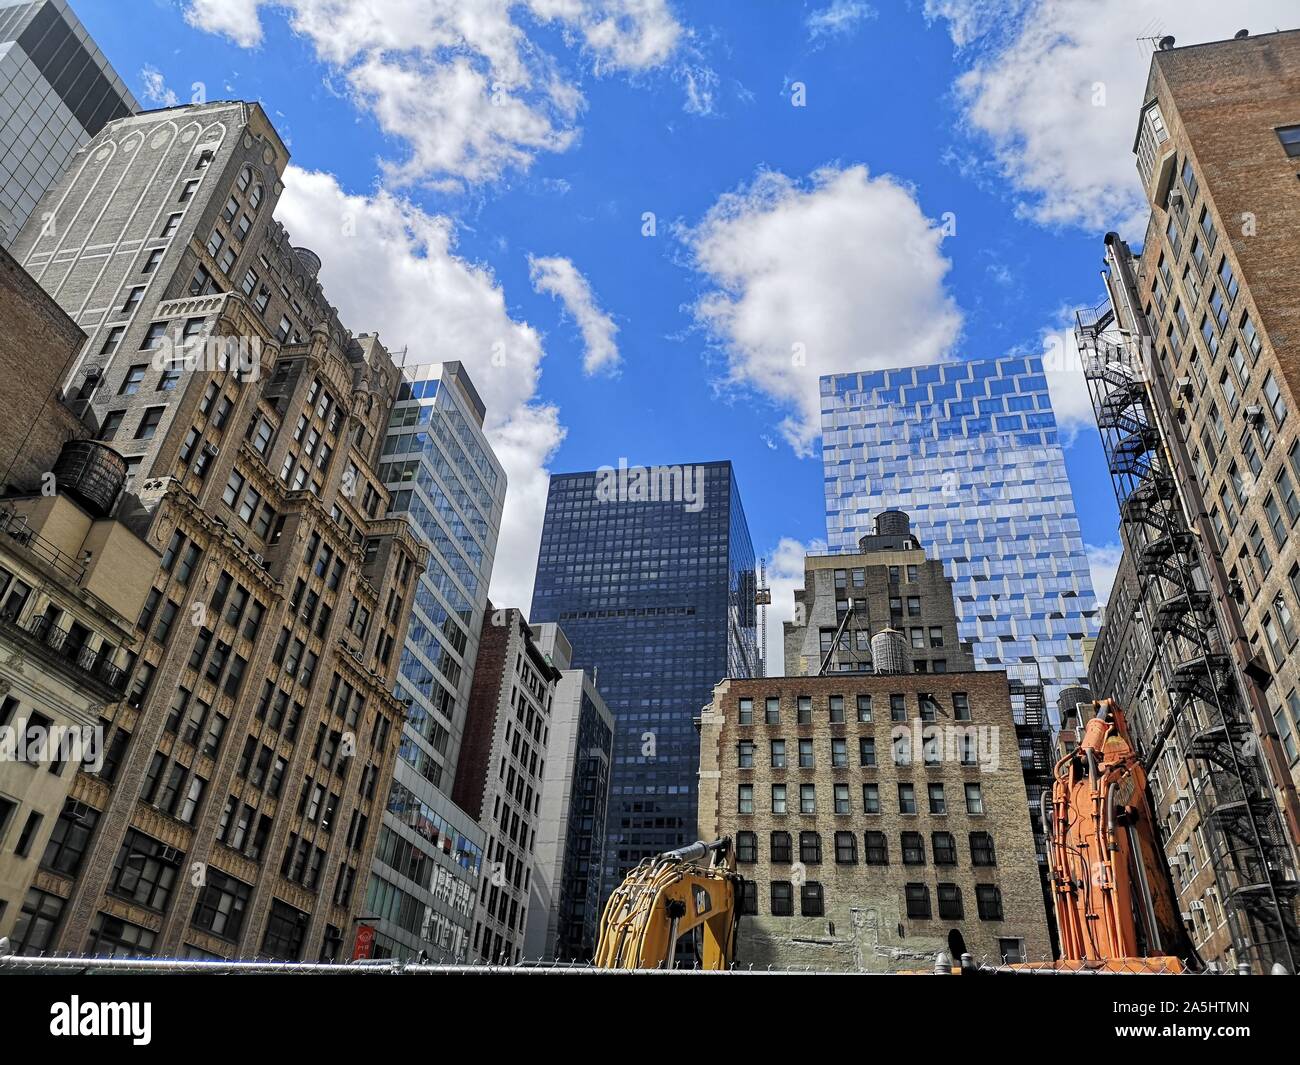 New York, USA. 13th Sep, 2019. Old and new buildings can be seen in New York's Manhattan district. Credit: Alexandra Schuler/dpa/Alamy Live News Stock Photo